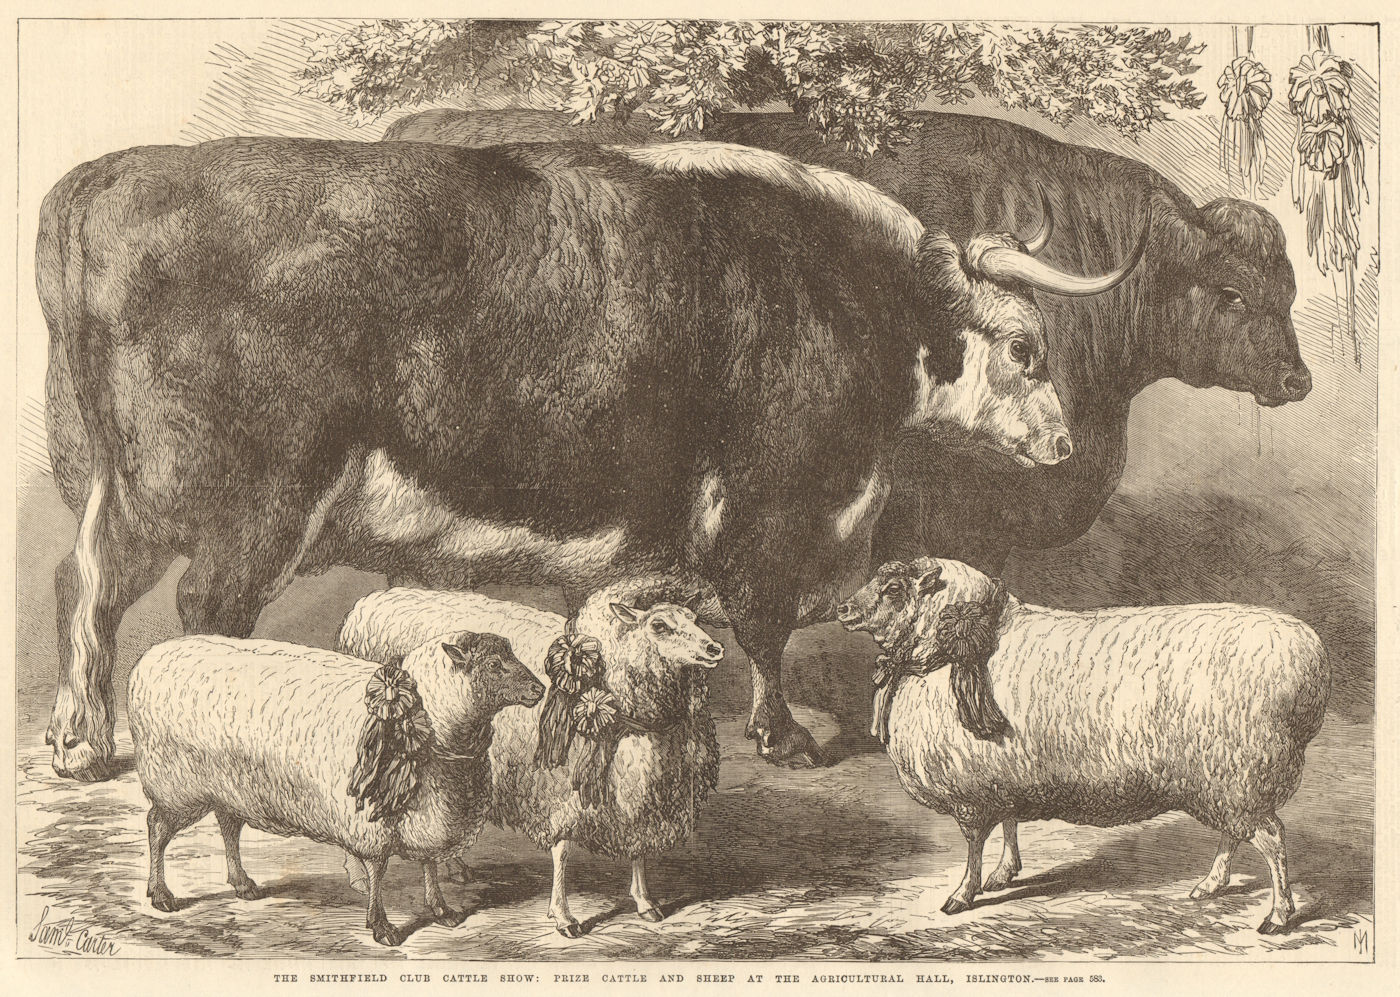 Associate Product The Smithfield Club cattle show: prize cattle & sheep II 1868 old print